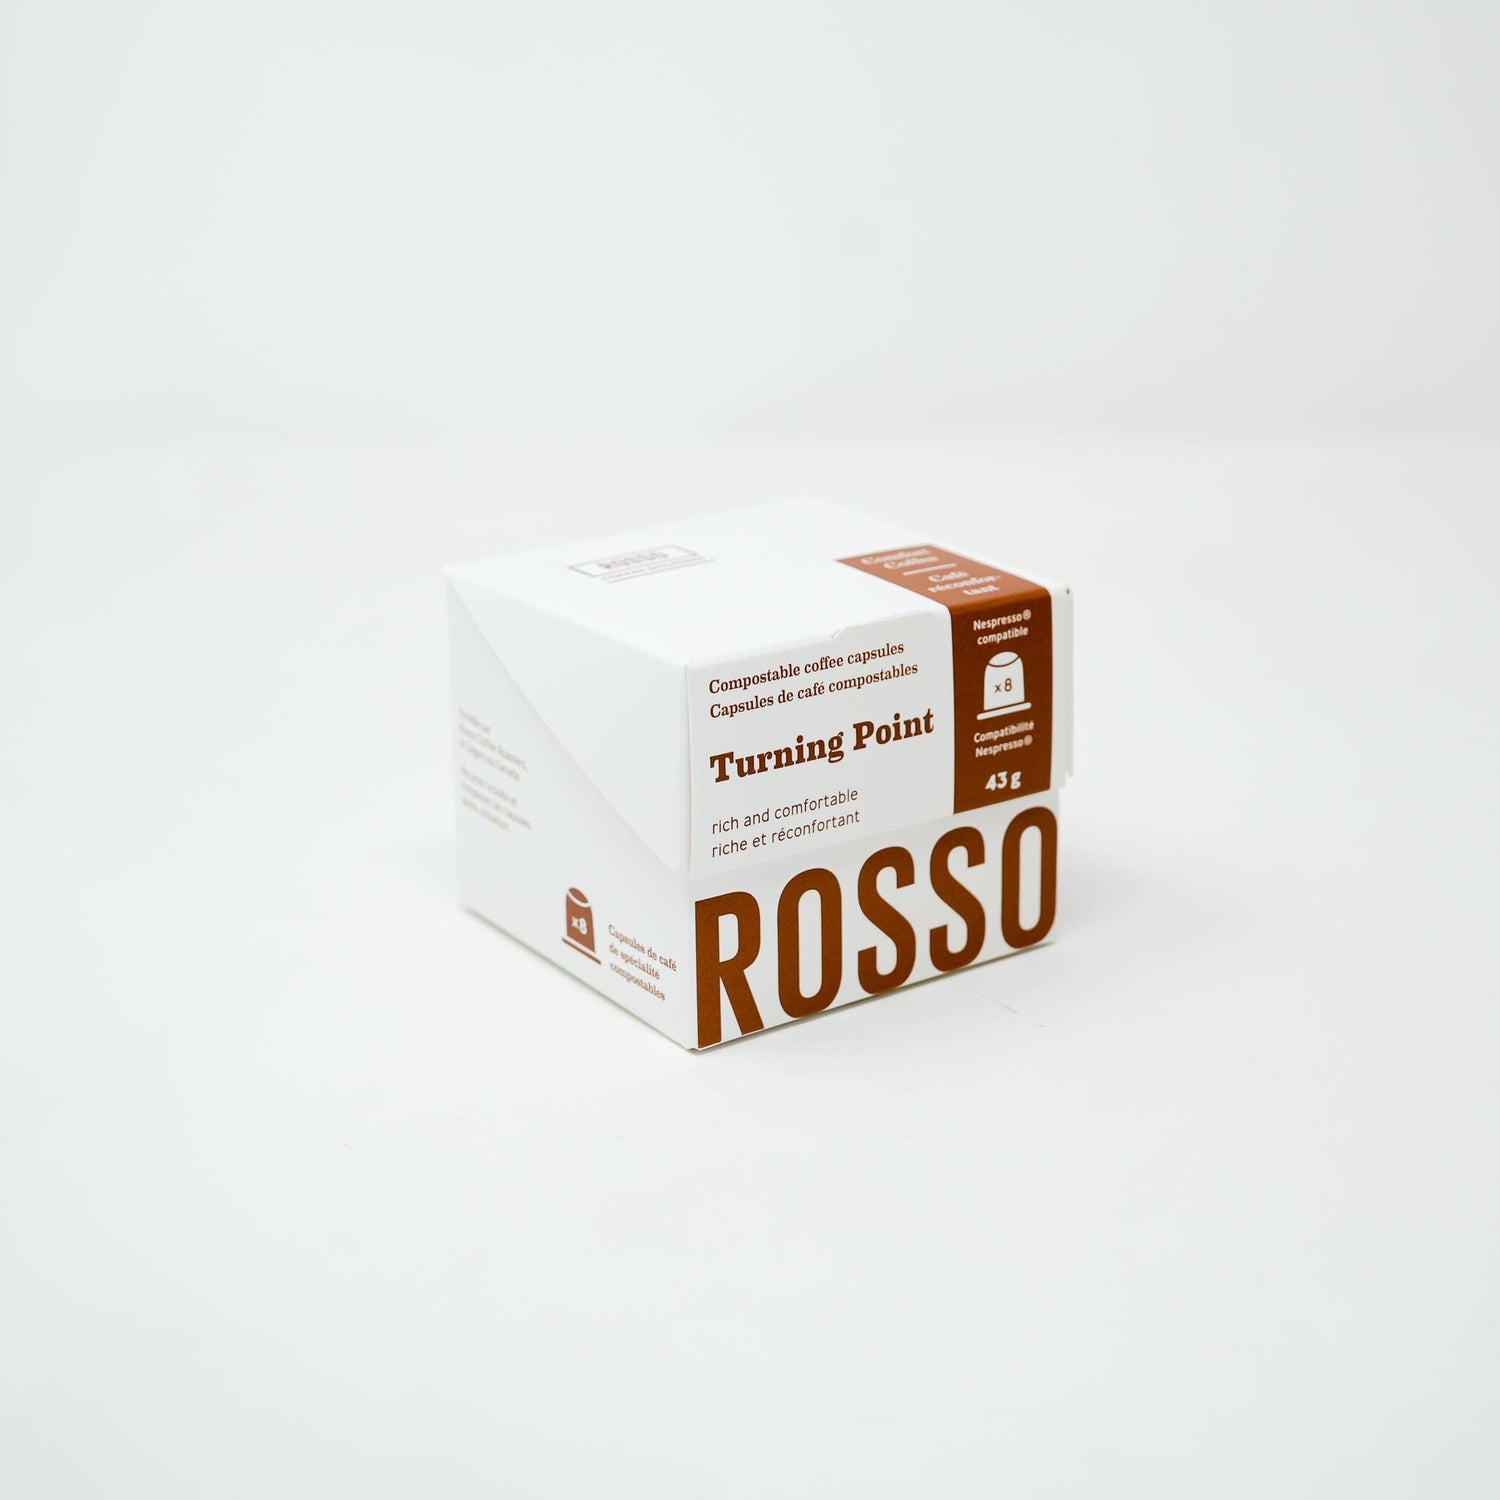 Turning Point Compostable Coffee Capsules Retail Web Capsule 